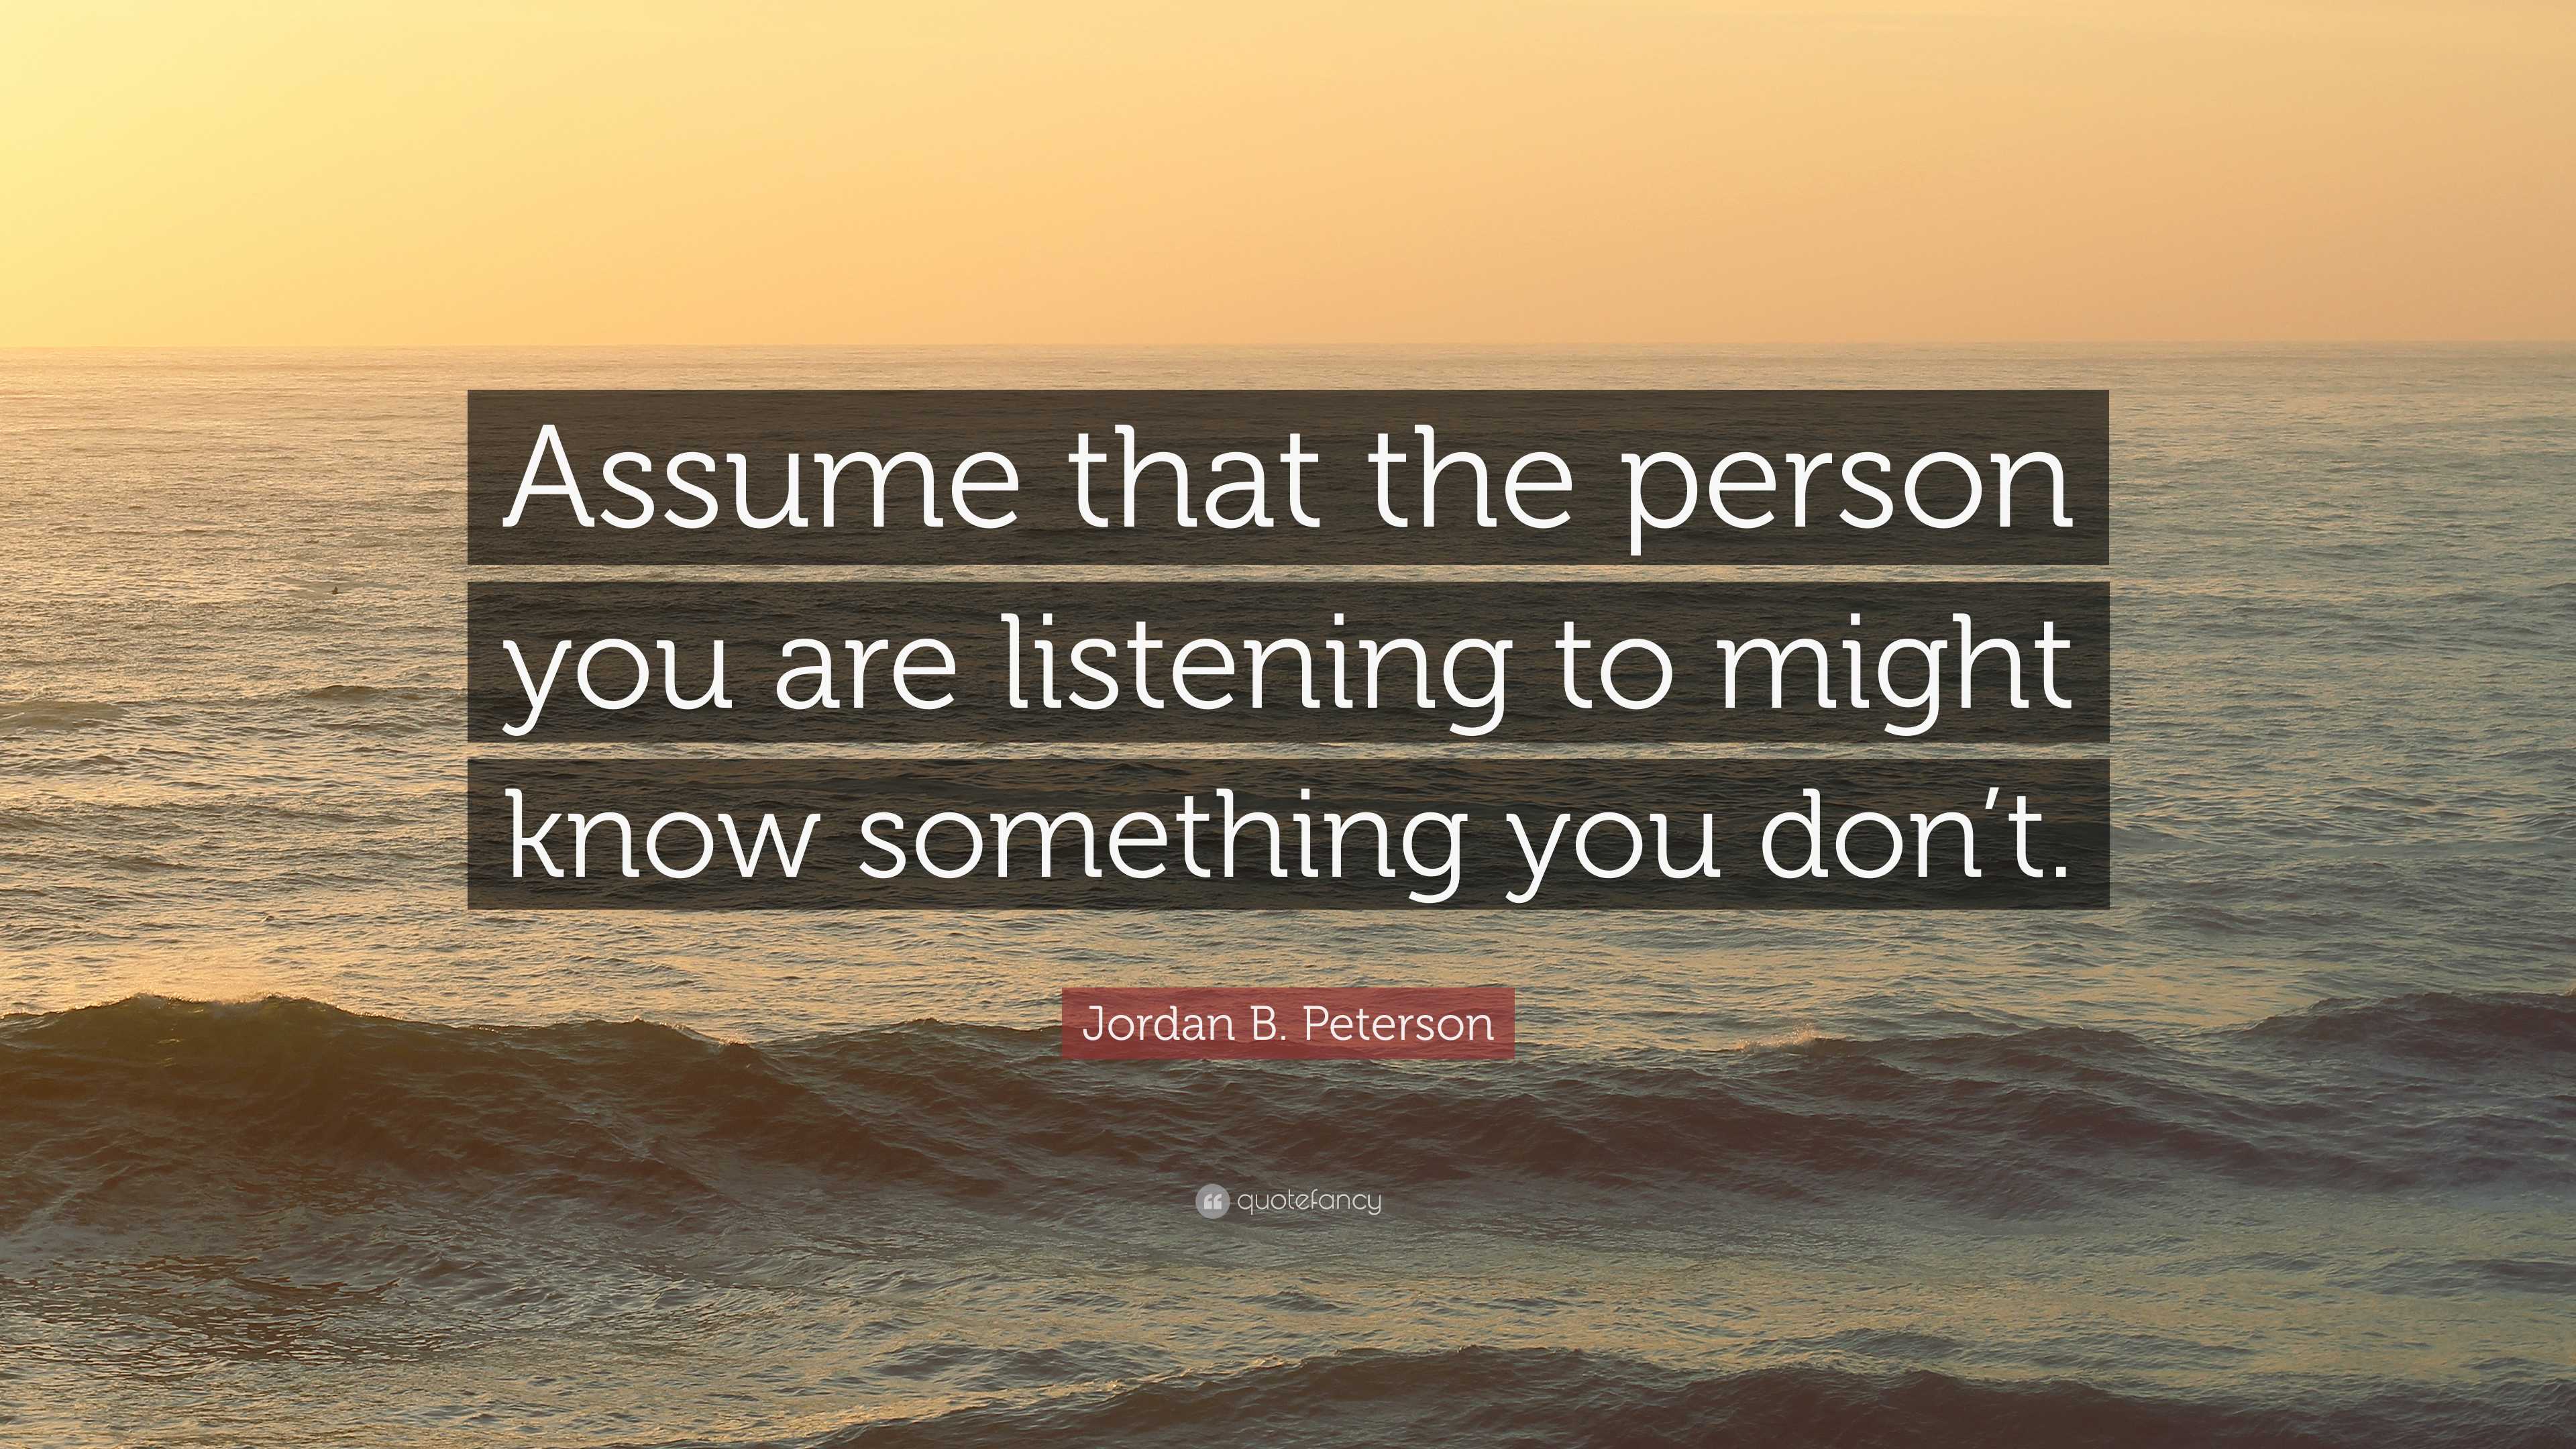 Jordan B. Peterson Quote: “Assume that the person you are listening to ...